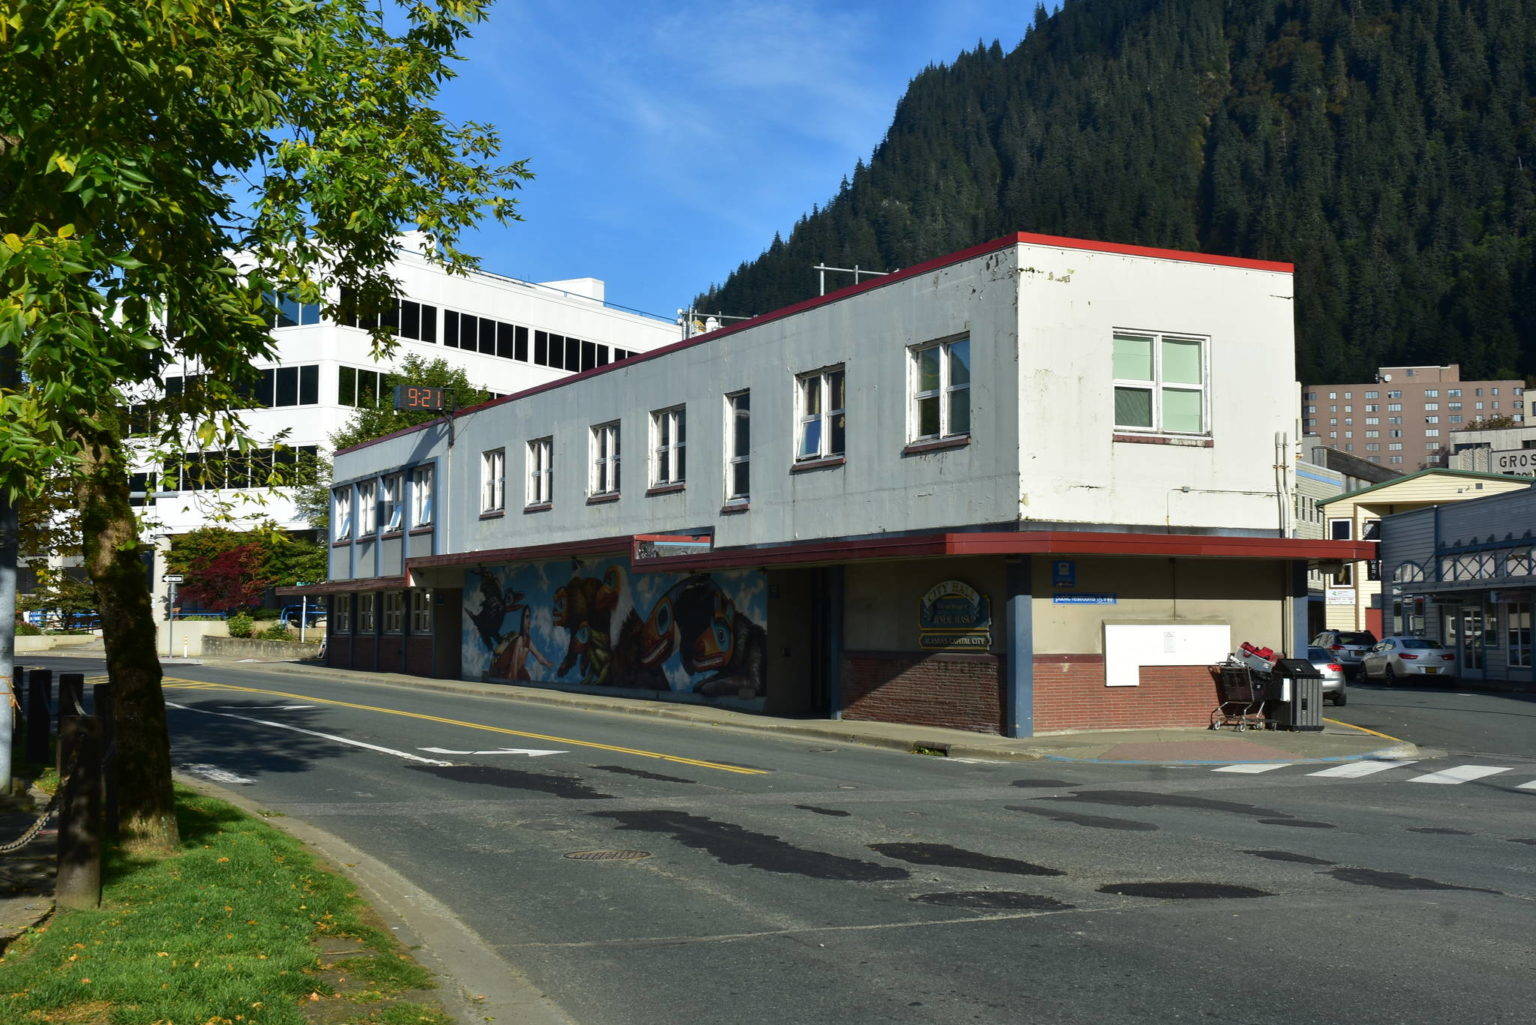 This photo shows Juneau City Hall on Tuesday, Sept. 15, 2020. (Peter Segall / Juneau Empire)